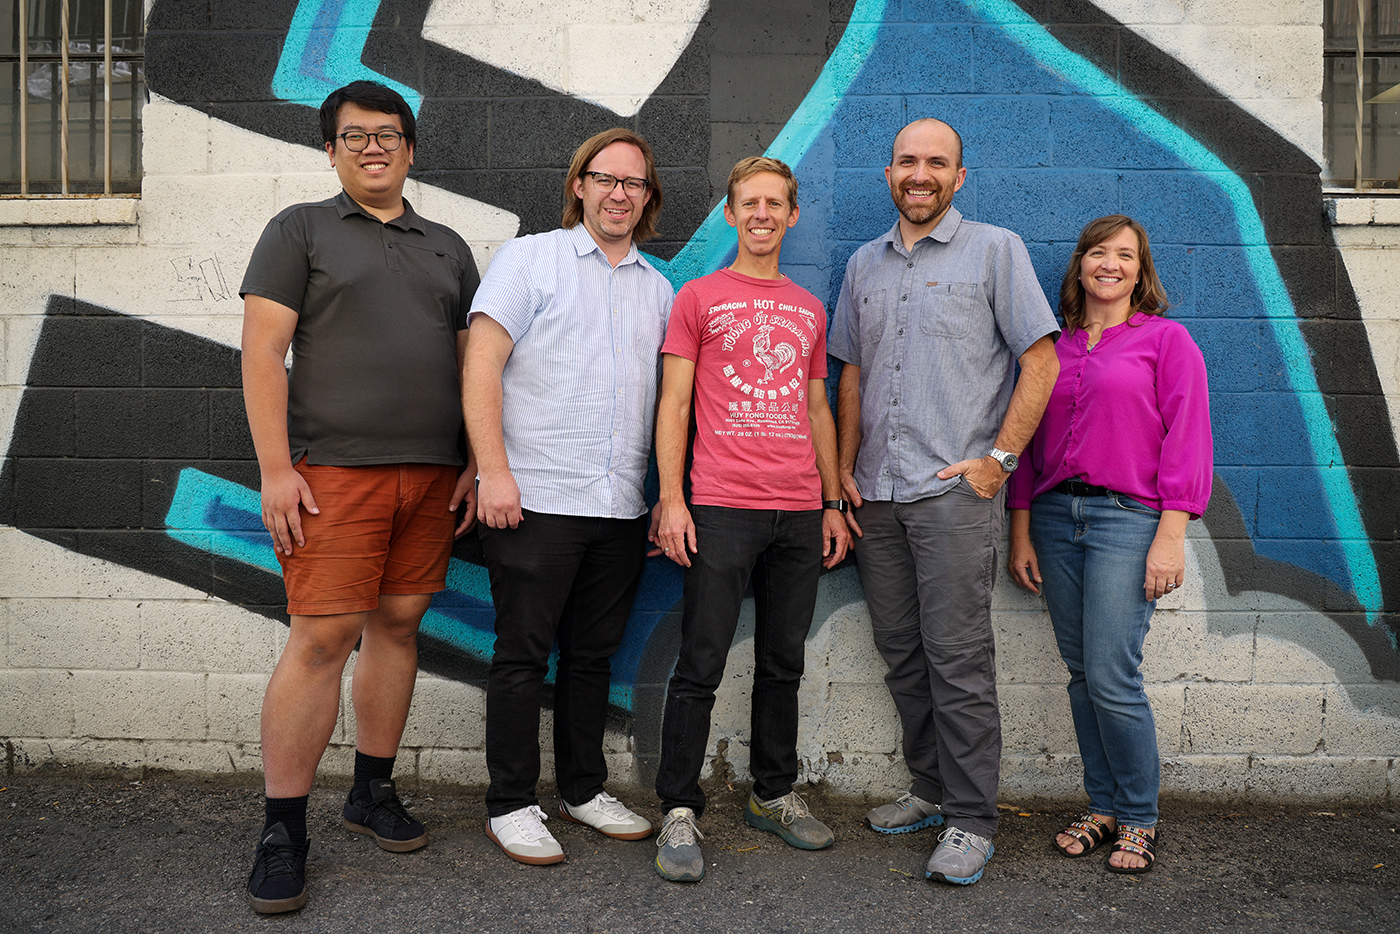 ASSIST Inc has been providing architectural design, community planning and development assistance to nonprofit and community groups for over 50 years. Pictured are the team at ASSIST (L–R): Zizheng Cao, Sam Ball, Jason Wheeler, Andrés Calderon and Jennifer Schreiter.